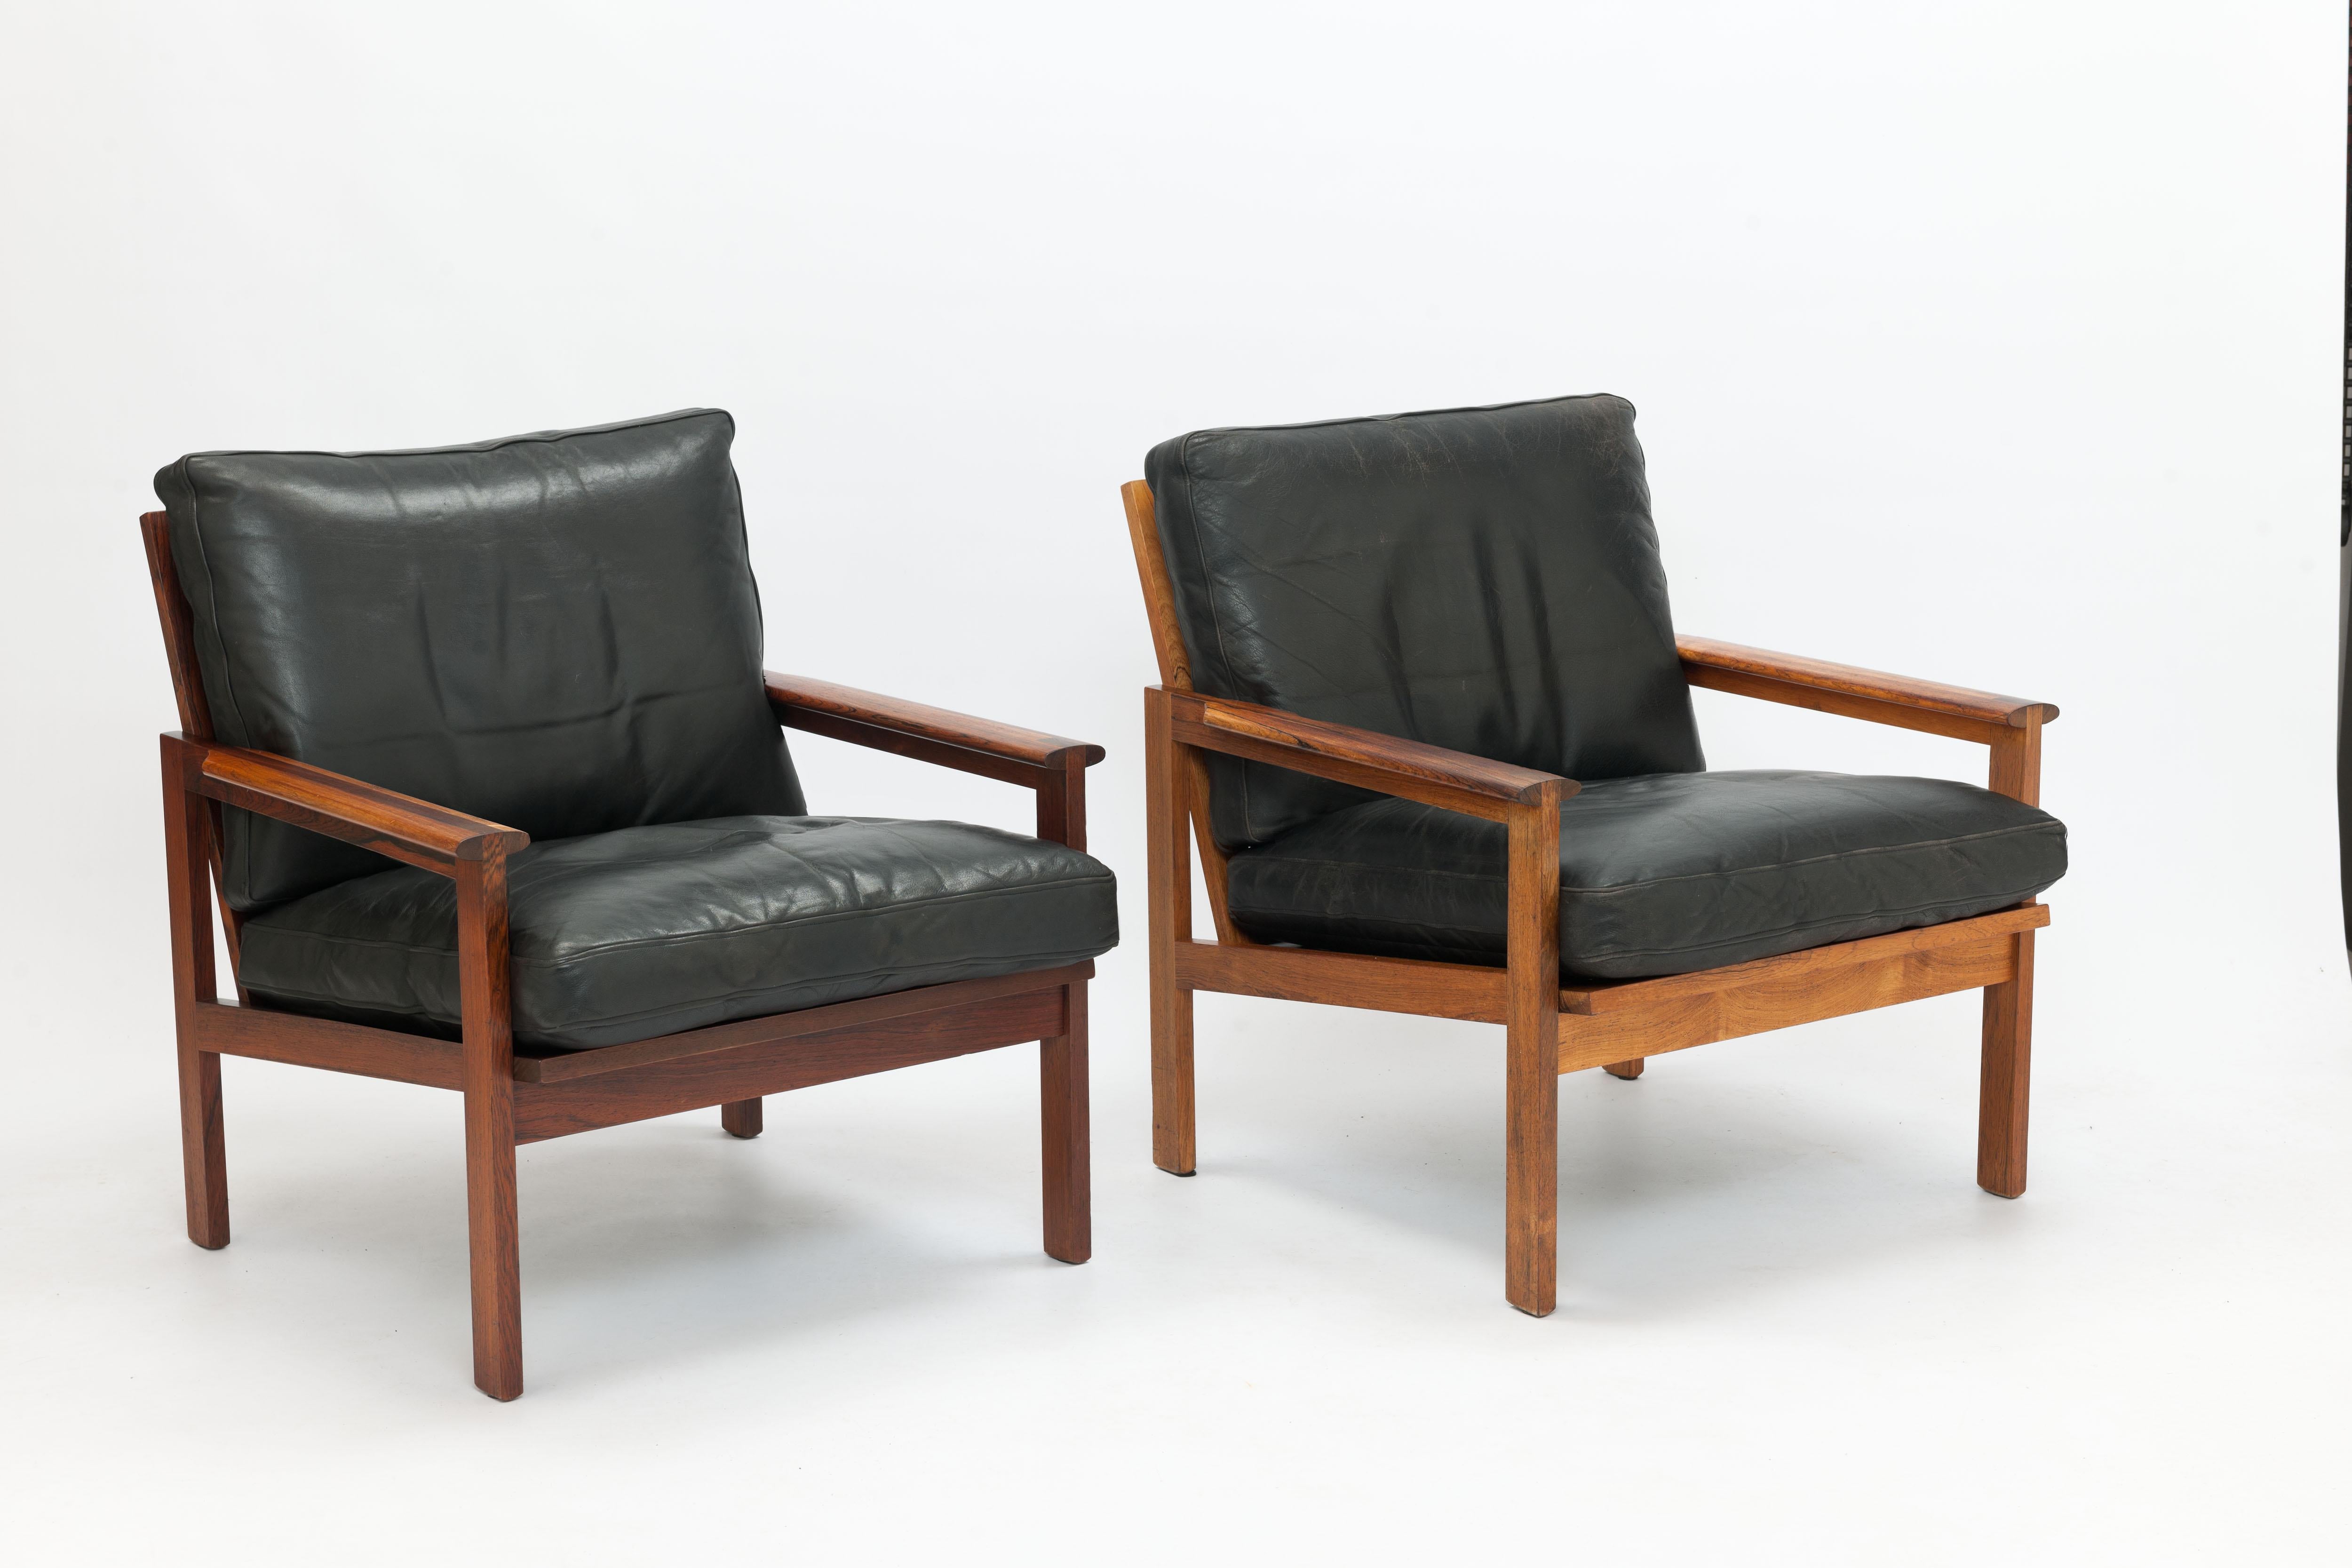 PRIVATE LISTING FOR MANUEL- Pair (2) Rosewood Capella Chairs by Illum Wikkelsø 2